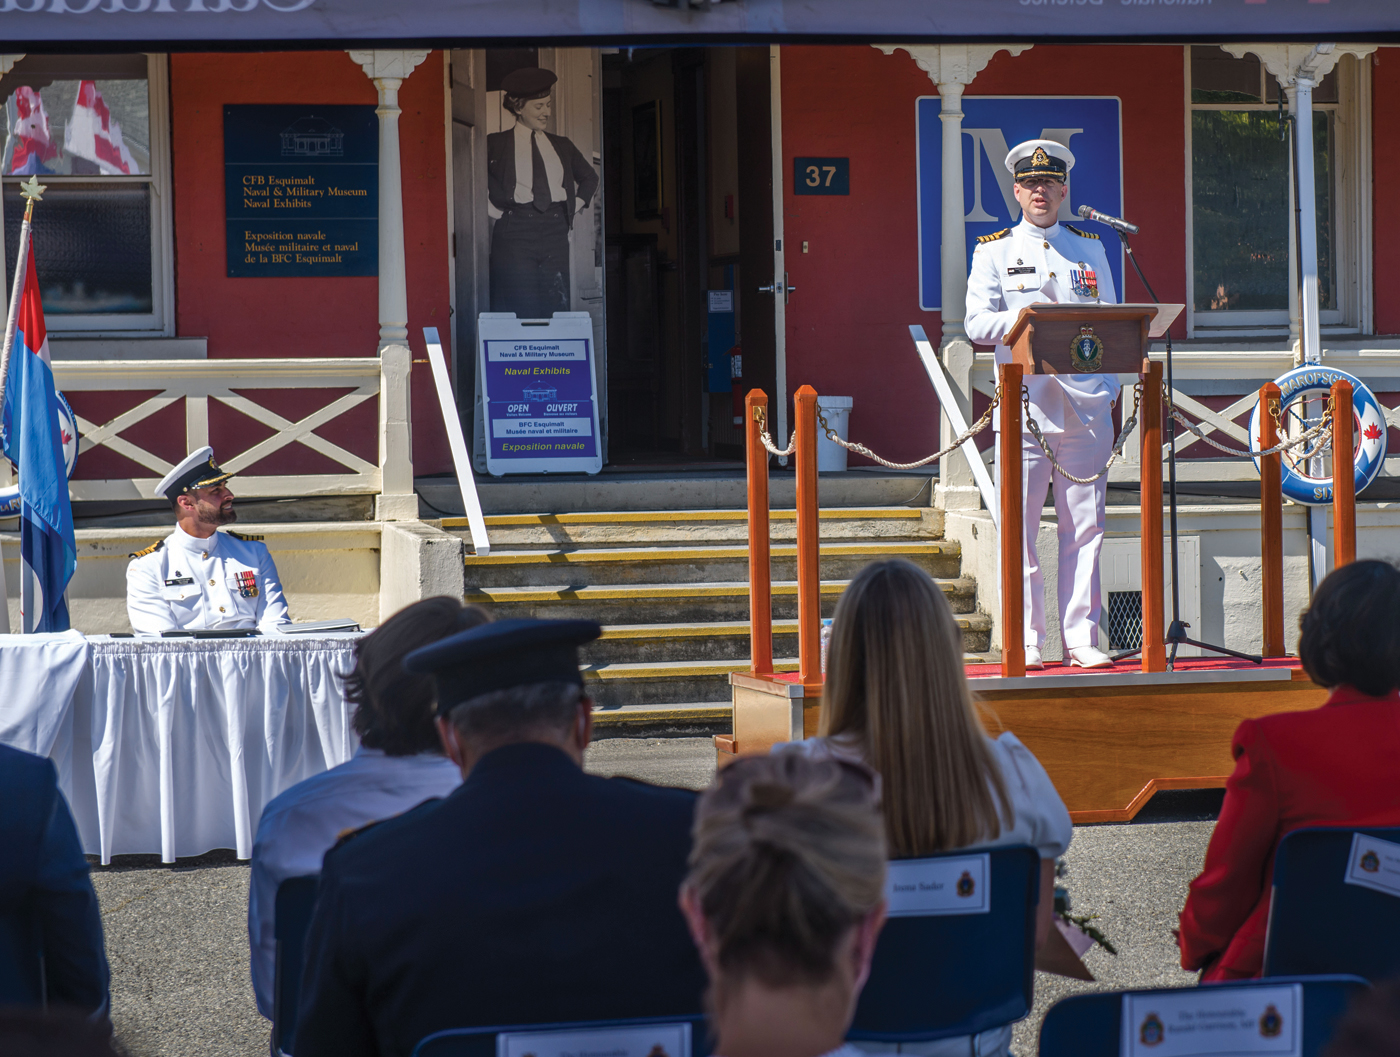 Capt(N) Jeff Hutchinson addresses the crowd gathered on museum square July 15 following the change of command of CFB Esquimalt. The speech marked his first as the new Base Commander. Photo by S1 Mike Goluboff, MARPAC Imaging Services, Esquimalt